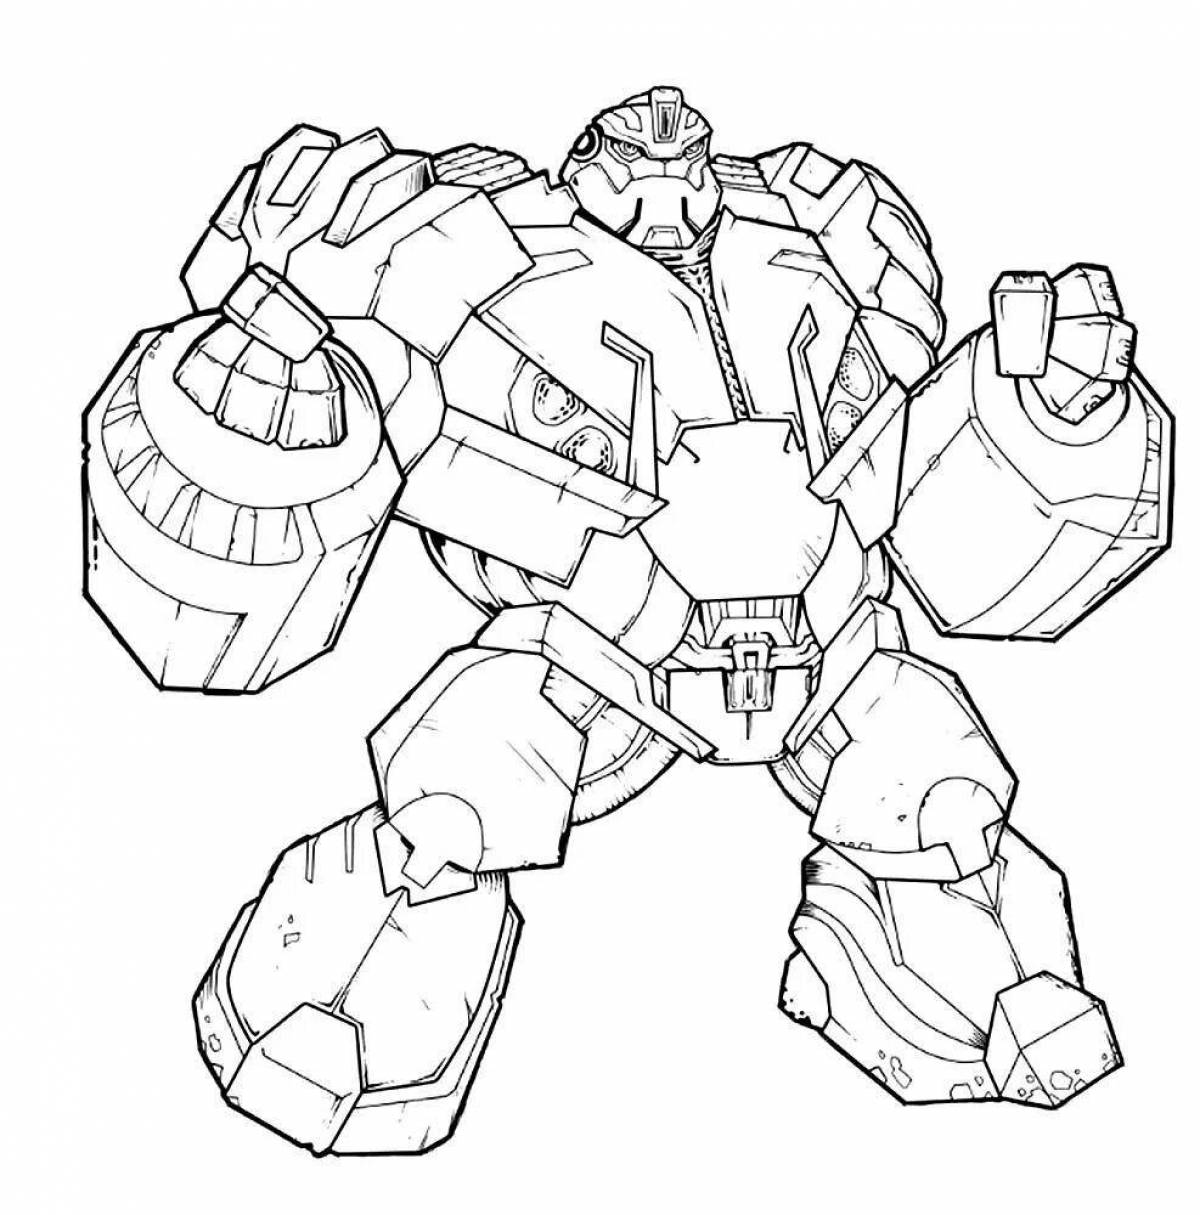 Dazzling Autobots coloring page